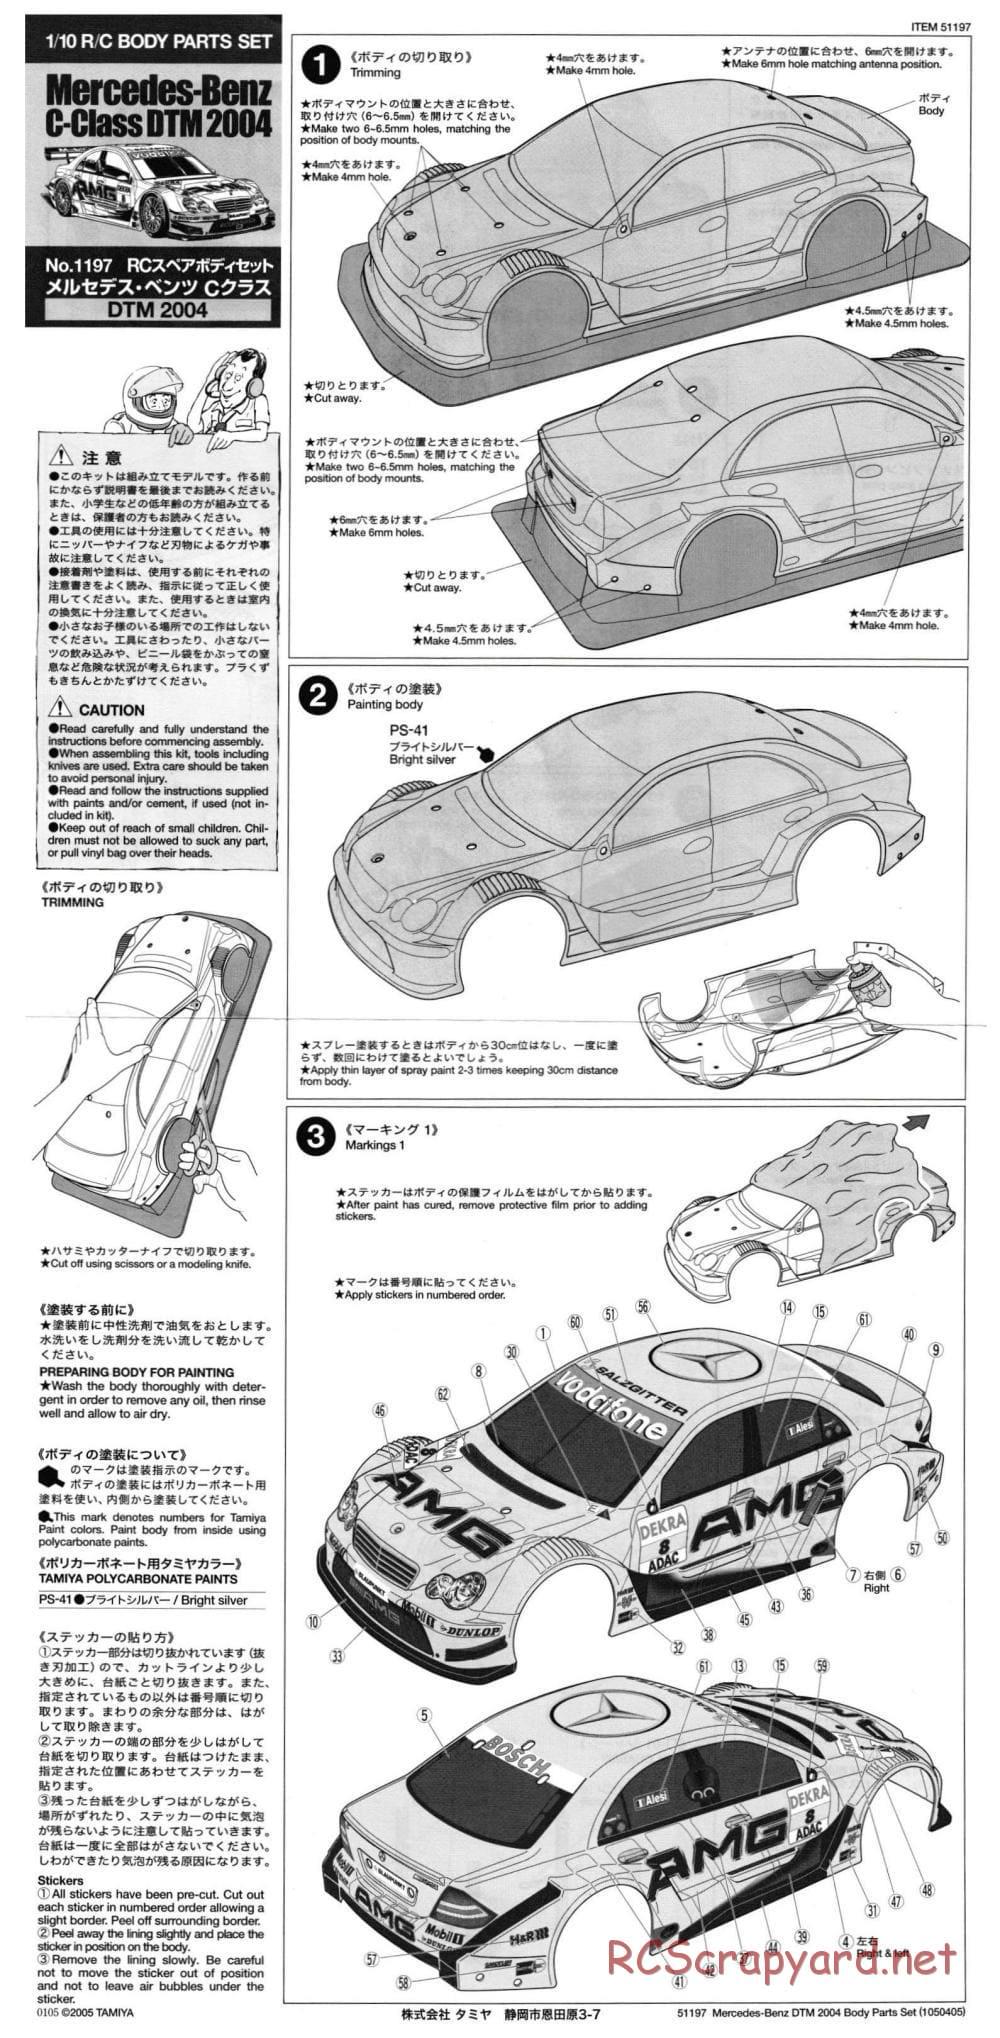 Tamiya - Mercedes Benz C-Class DTM 2004 - TT-01 Chassis - Body Manual - Page 1